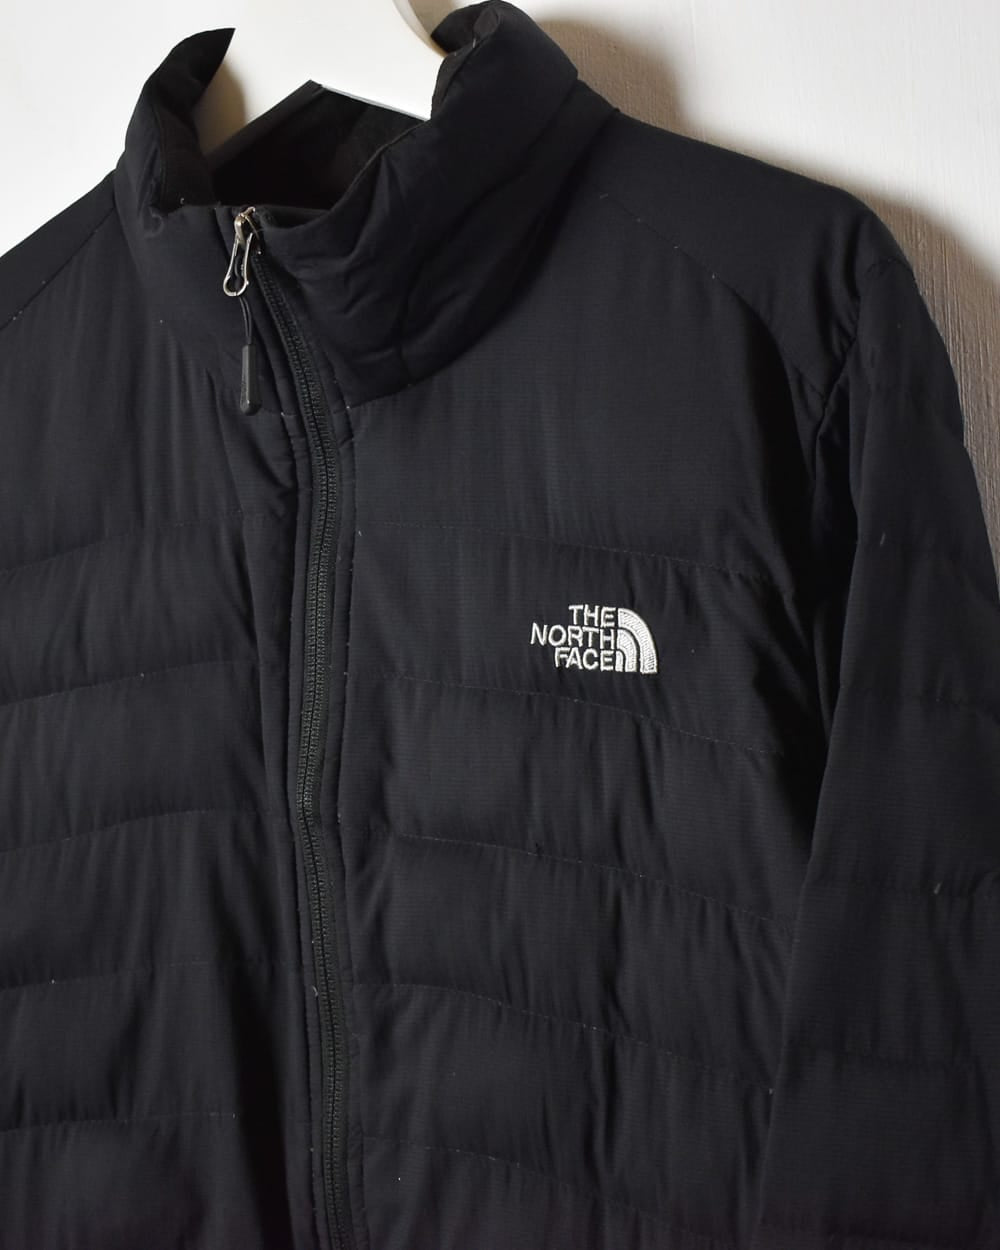 Black The North Face 700 Pro Puffer Jacket - Large Women's